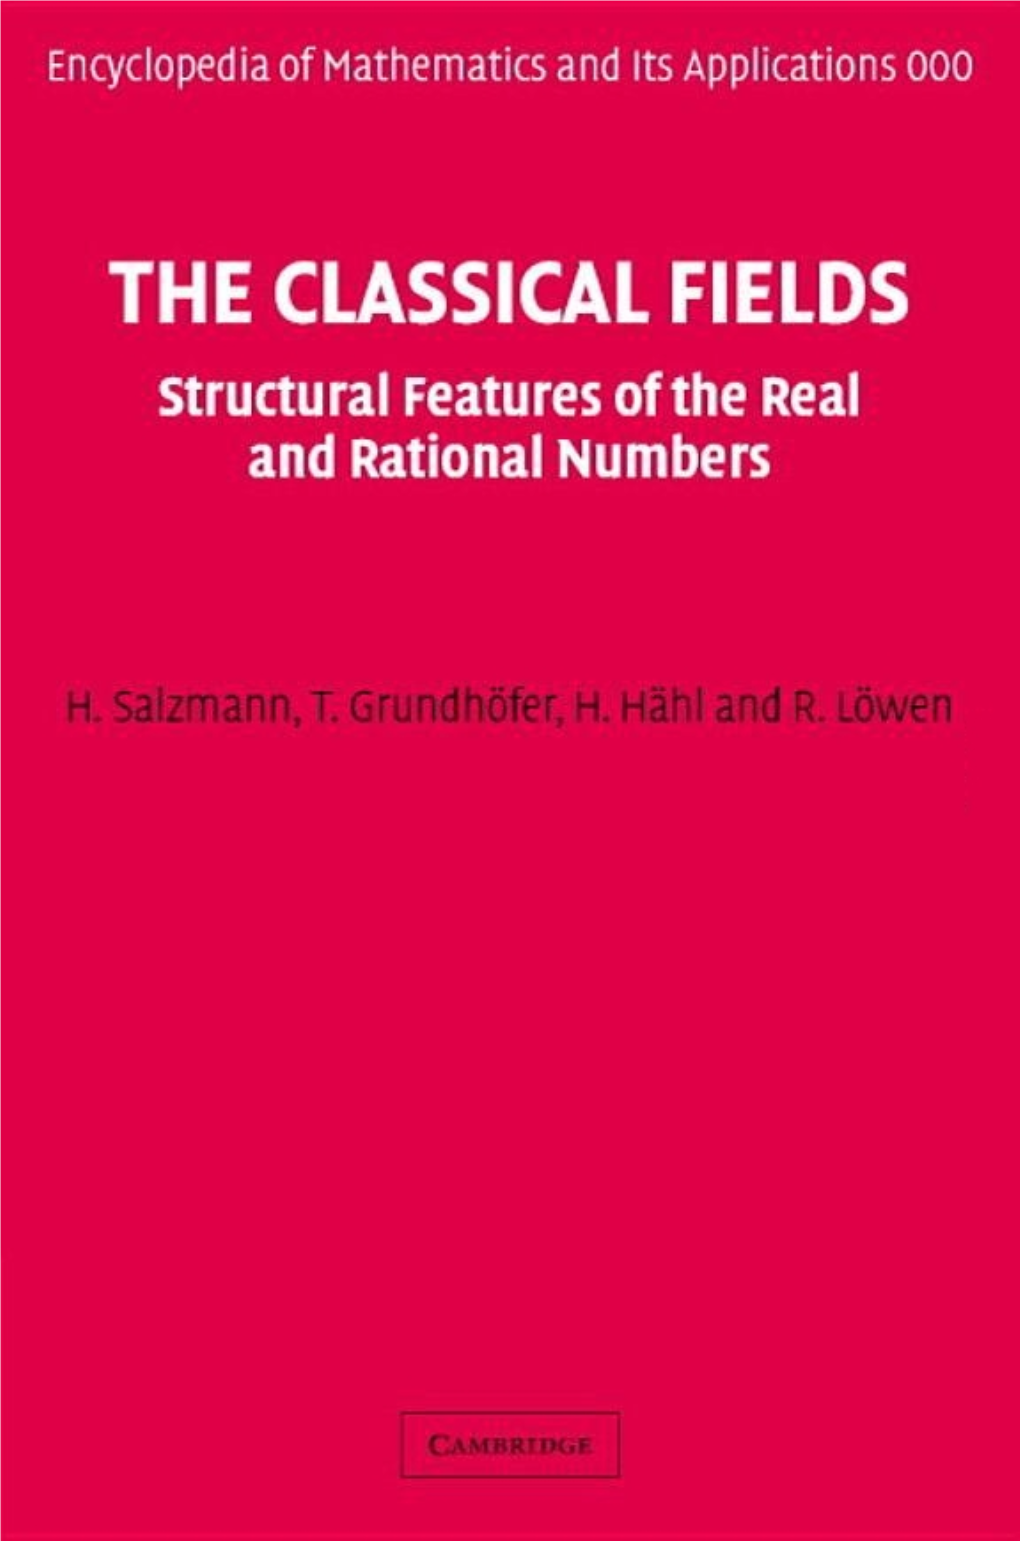 Structural Features of the Real and Rational Numbers ENCYCLOPEDIA of MATHEMATICS and ITS APPLICATIONS